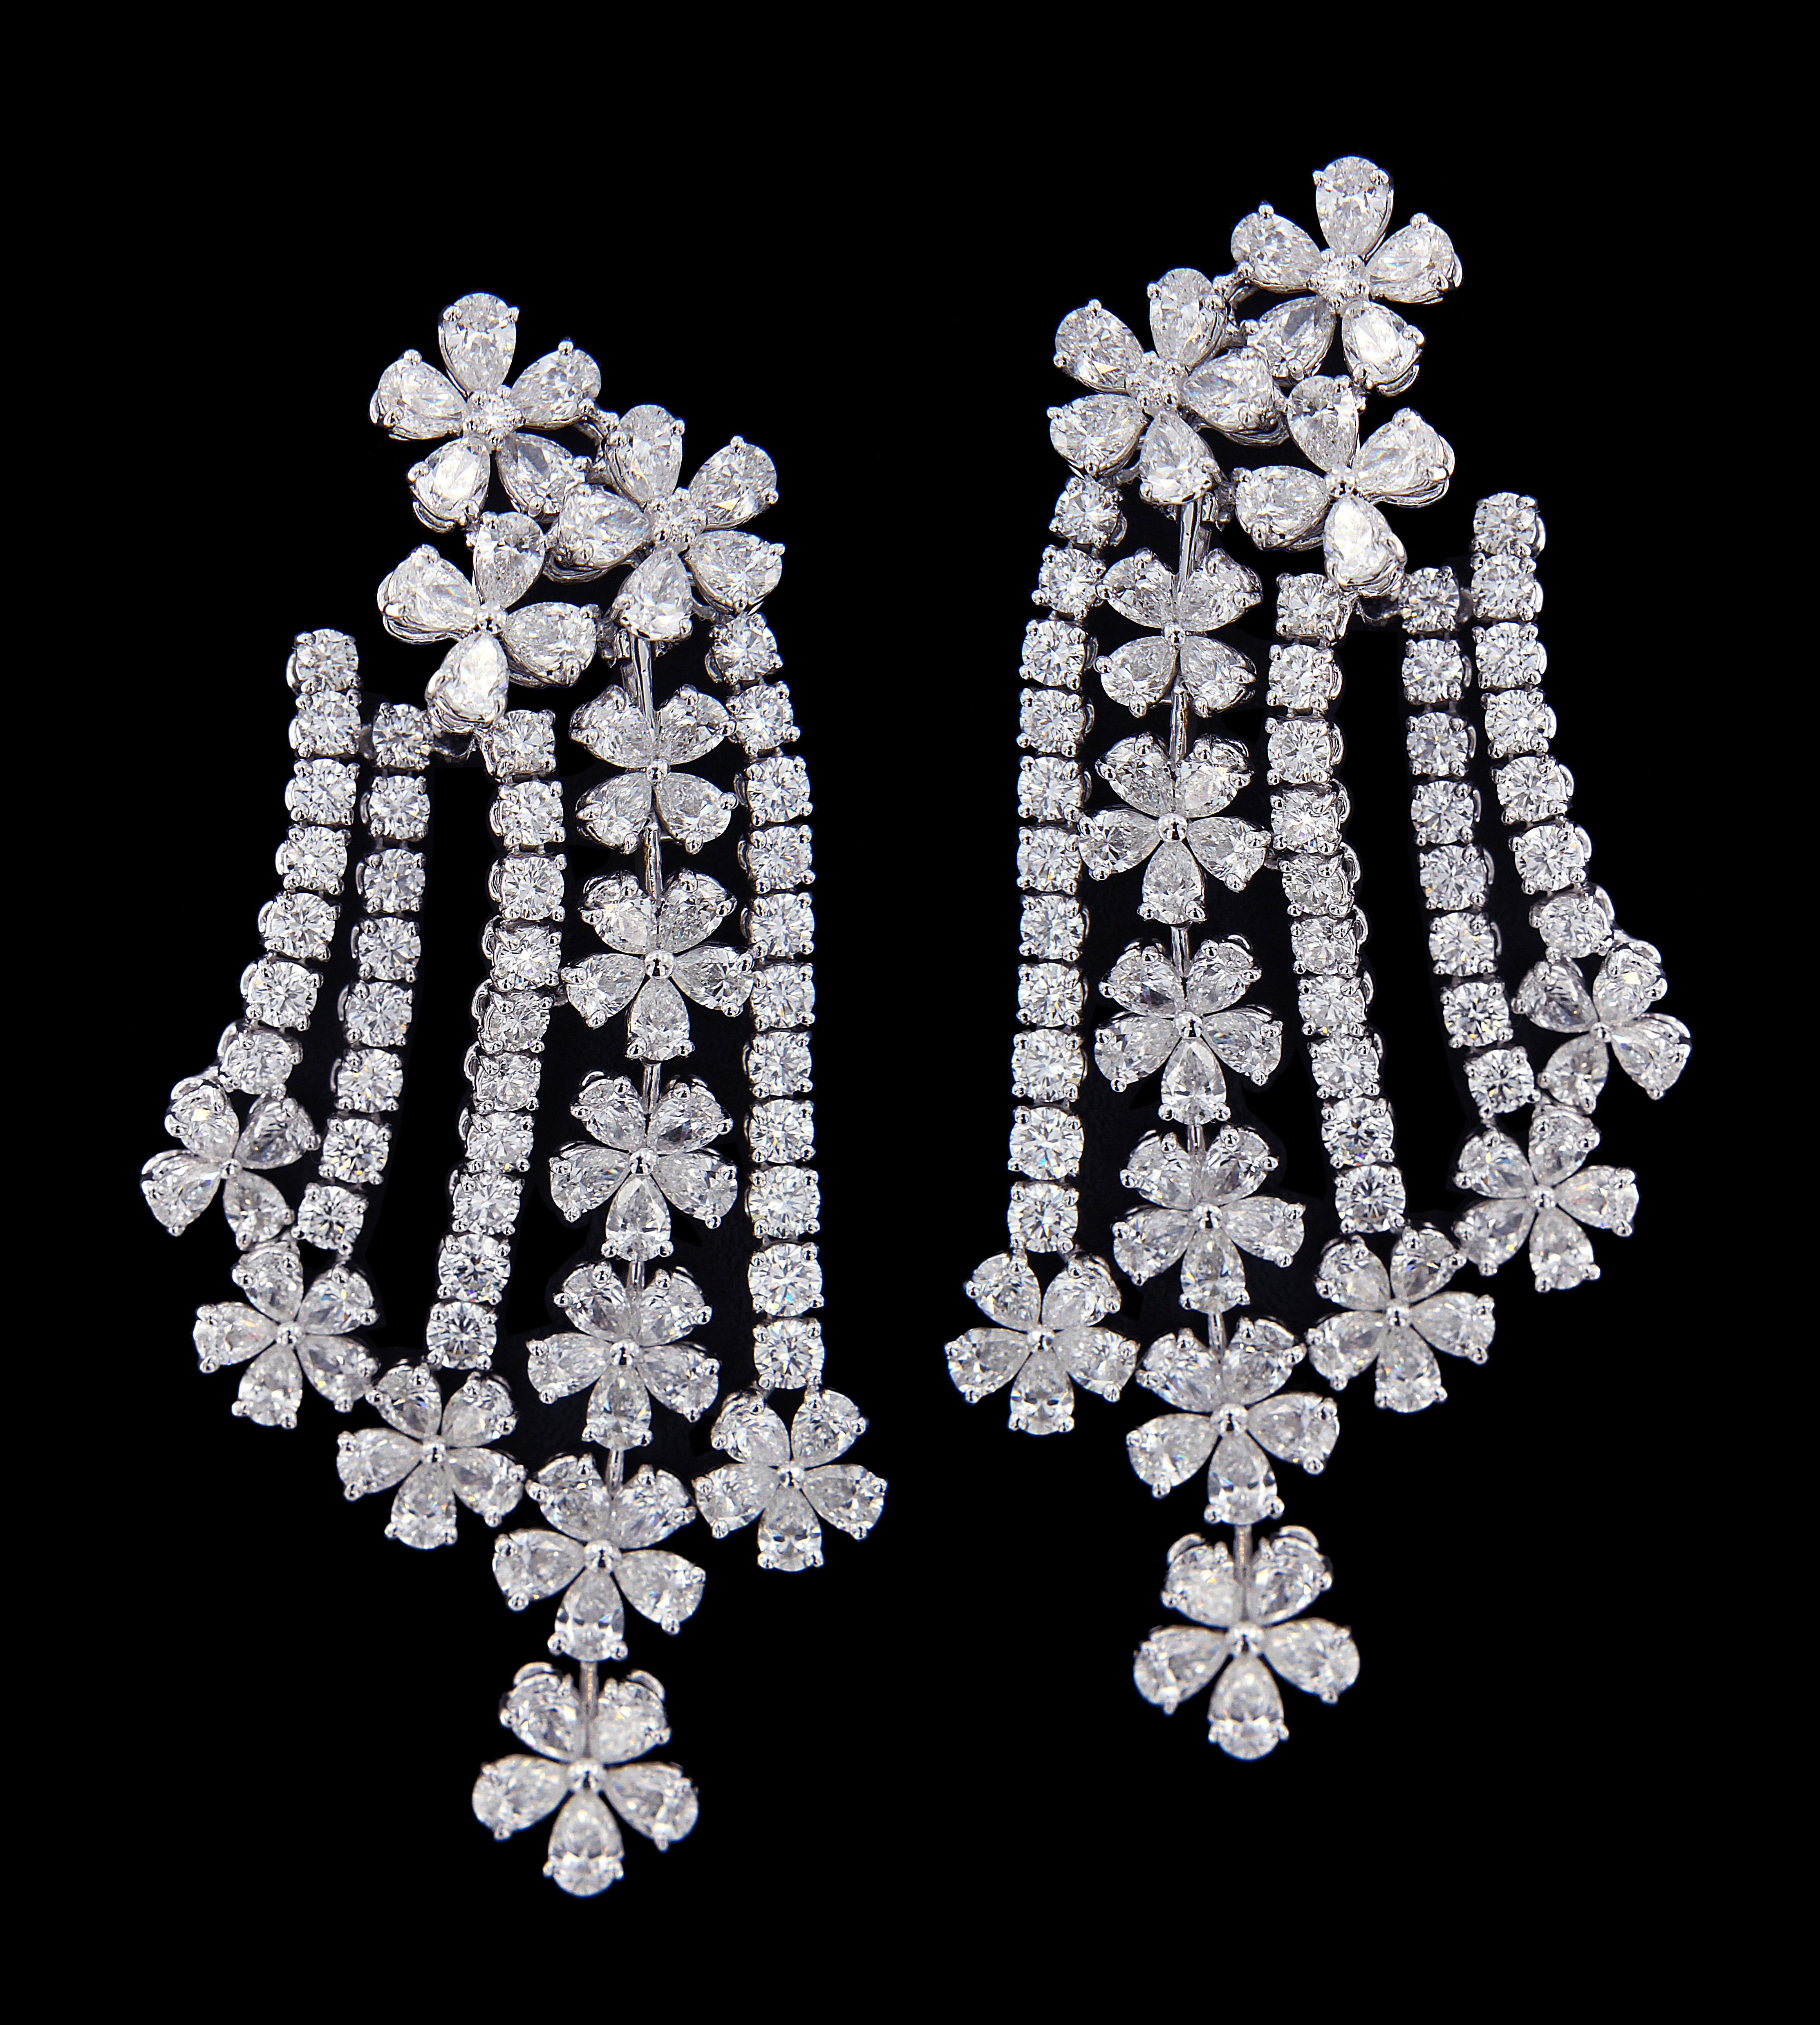 Beautiful 18 Karat White Gold And Diamond Flower Earrings.

Diamonds of approximately 15.885 carats mounted on 18 karats white gold and diamond flower earrings. The earring weighs approximately 24.593 grams.

Please note: The charges specified do